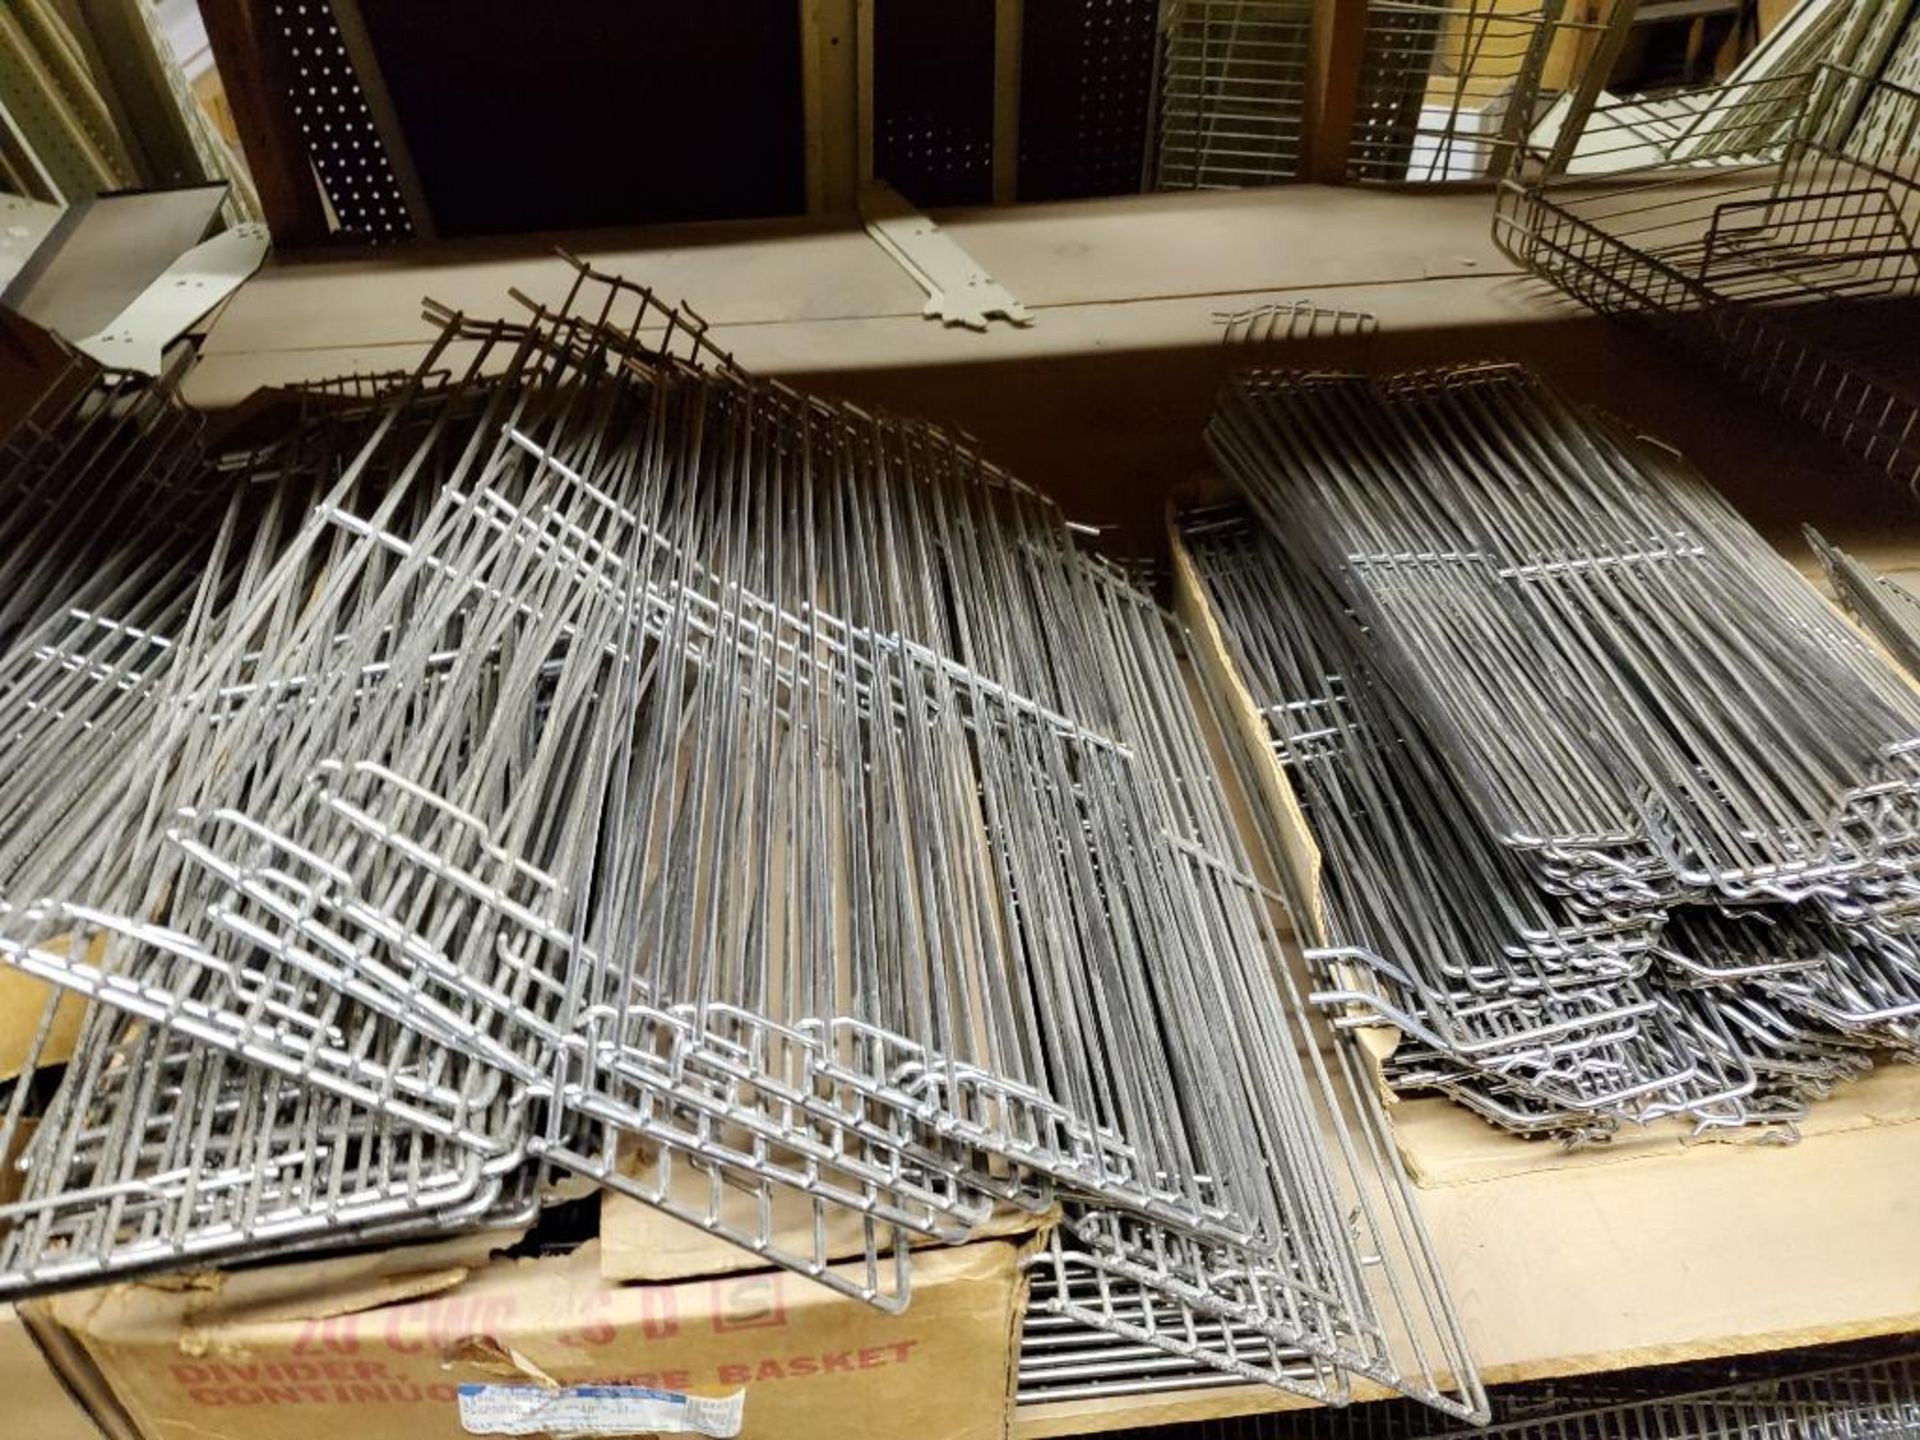 Large assortment of shelving components in attic. - Image 15 of 17